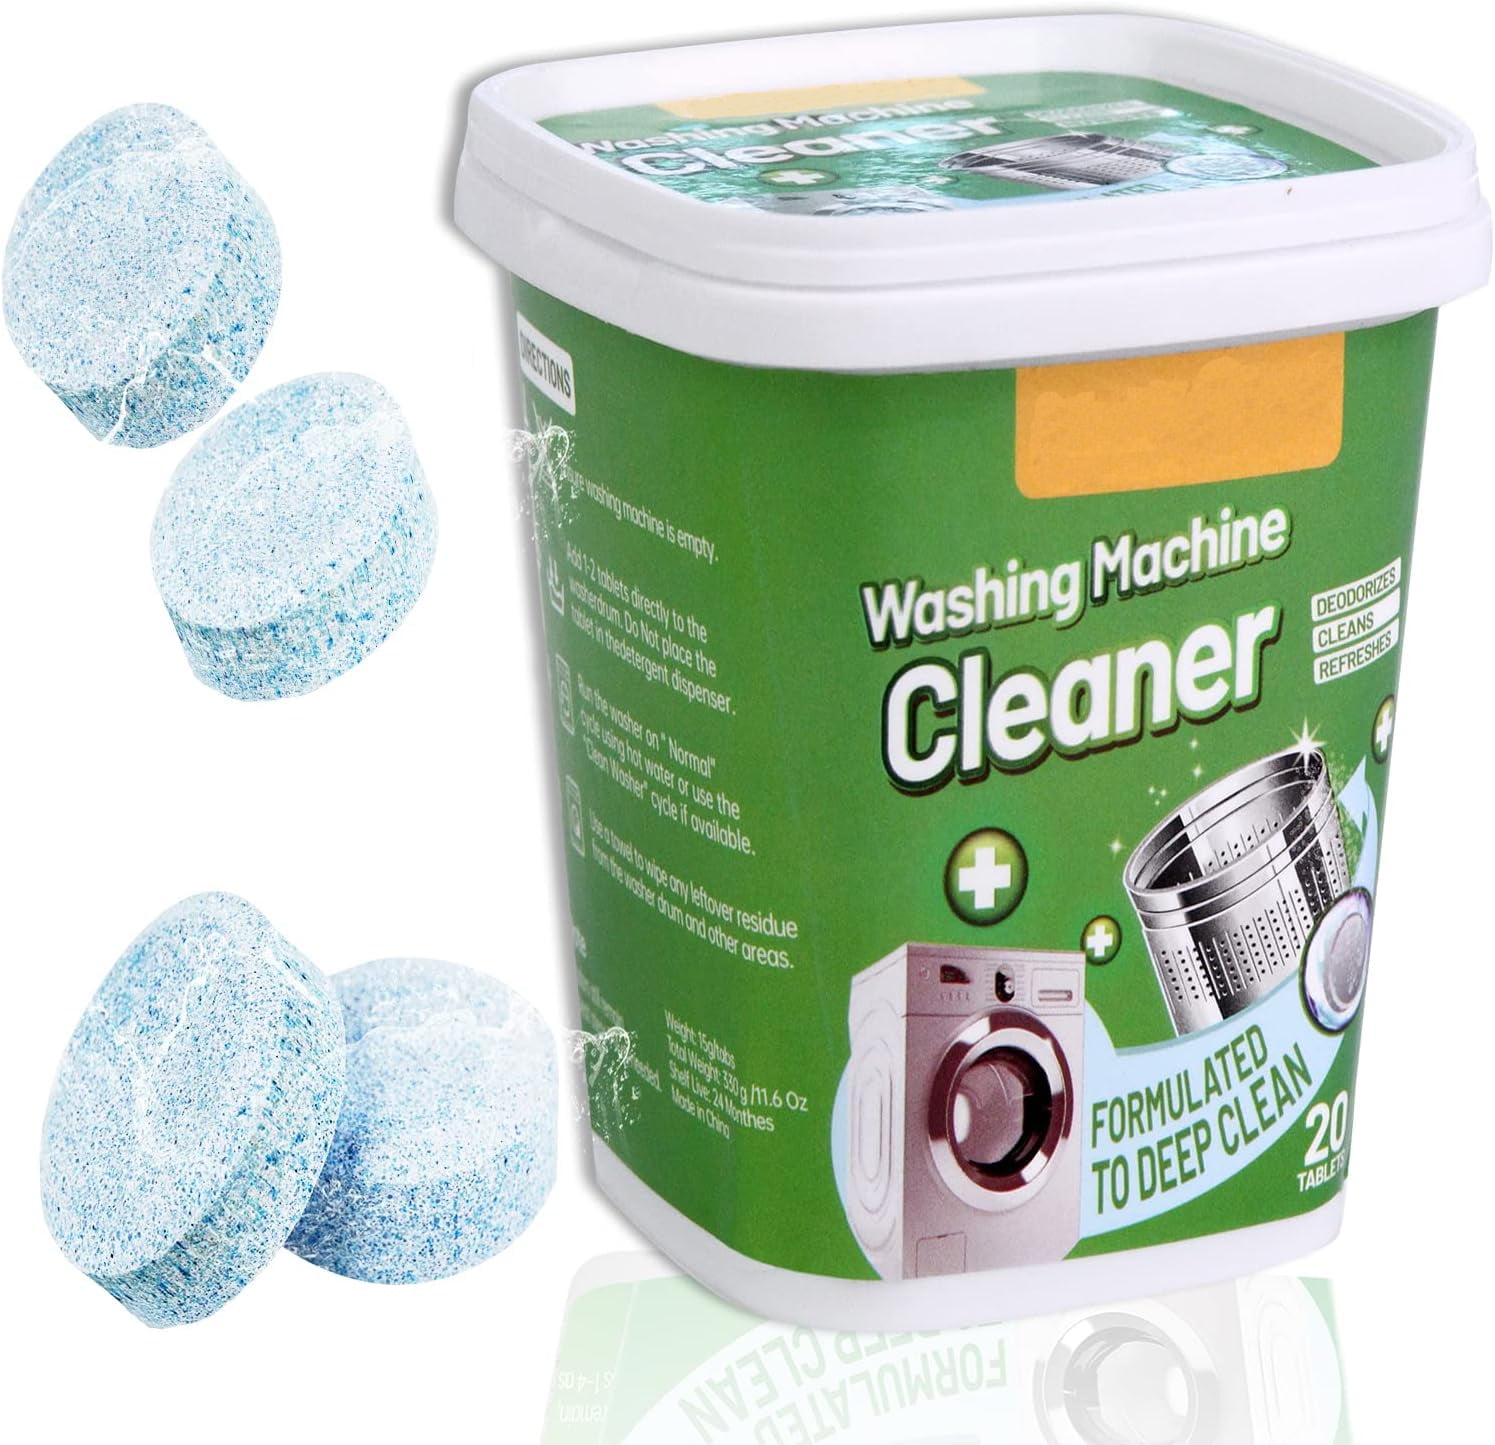  SPLASH SPOTLESS Washing Machine Cleaner Deep Cleaning For HE  Top Load Washers And Front Load